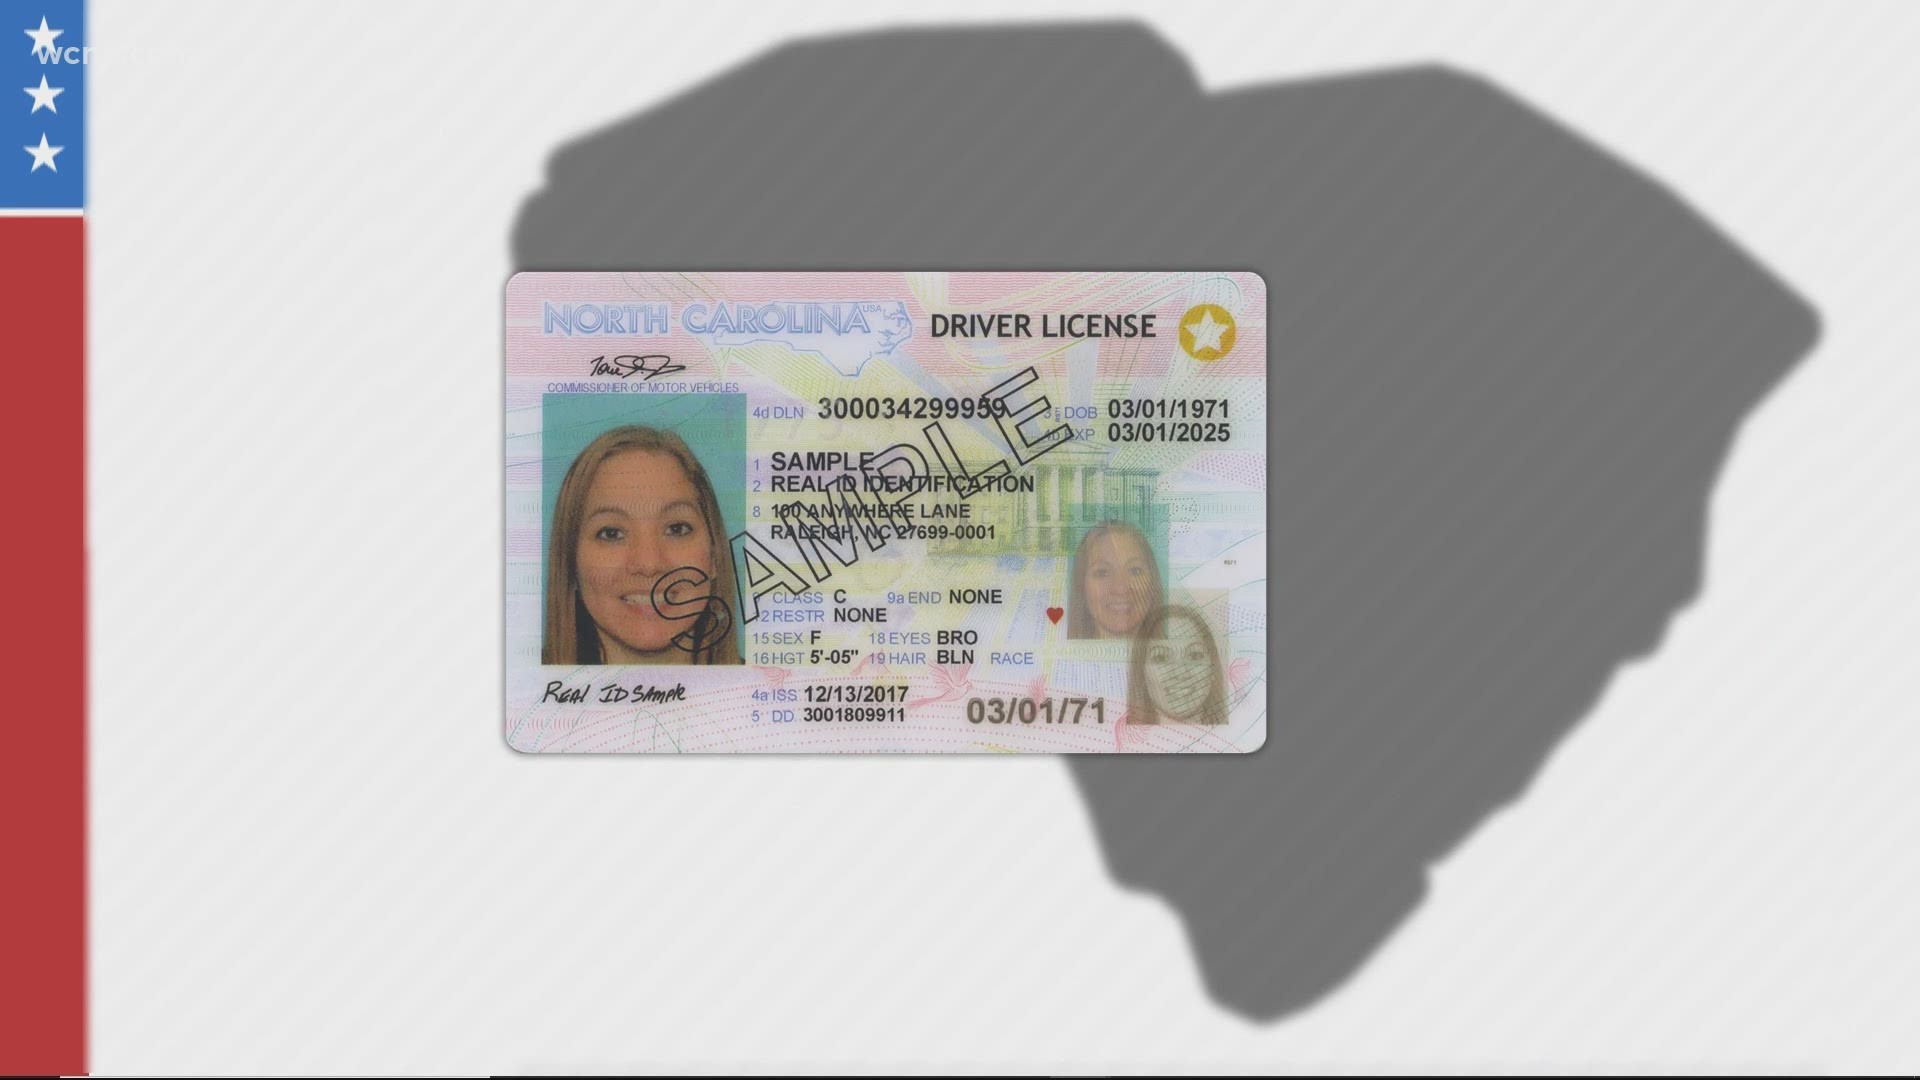 North Carolina does not require photo ID to cast a ballot, but all voters in South Carolina must present an approved photo ID to vote.